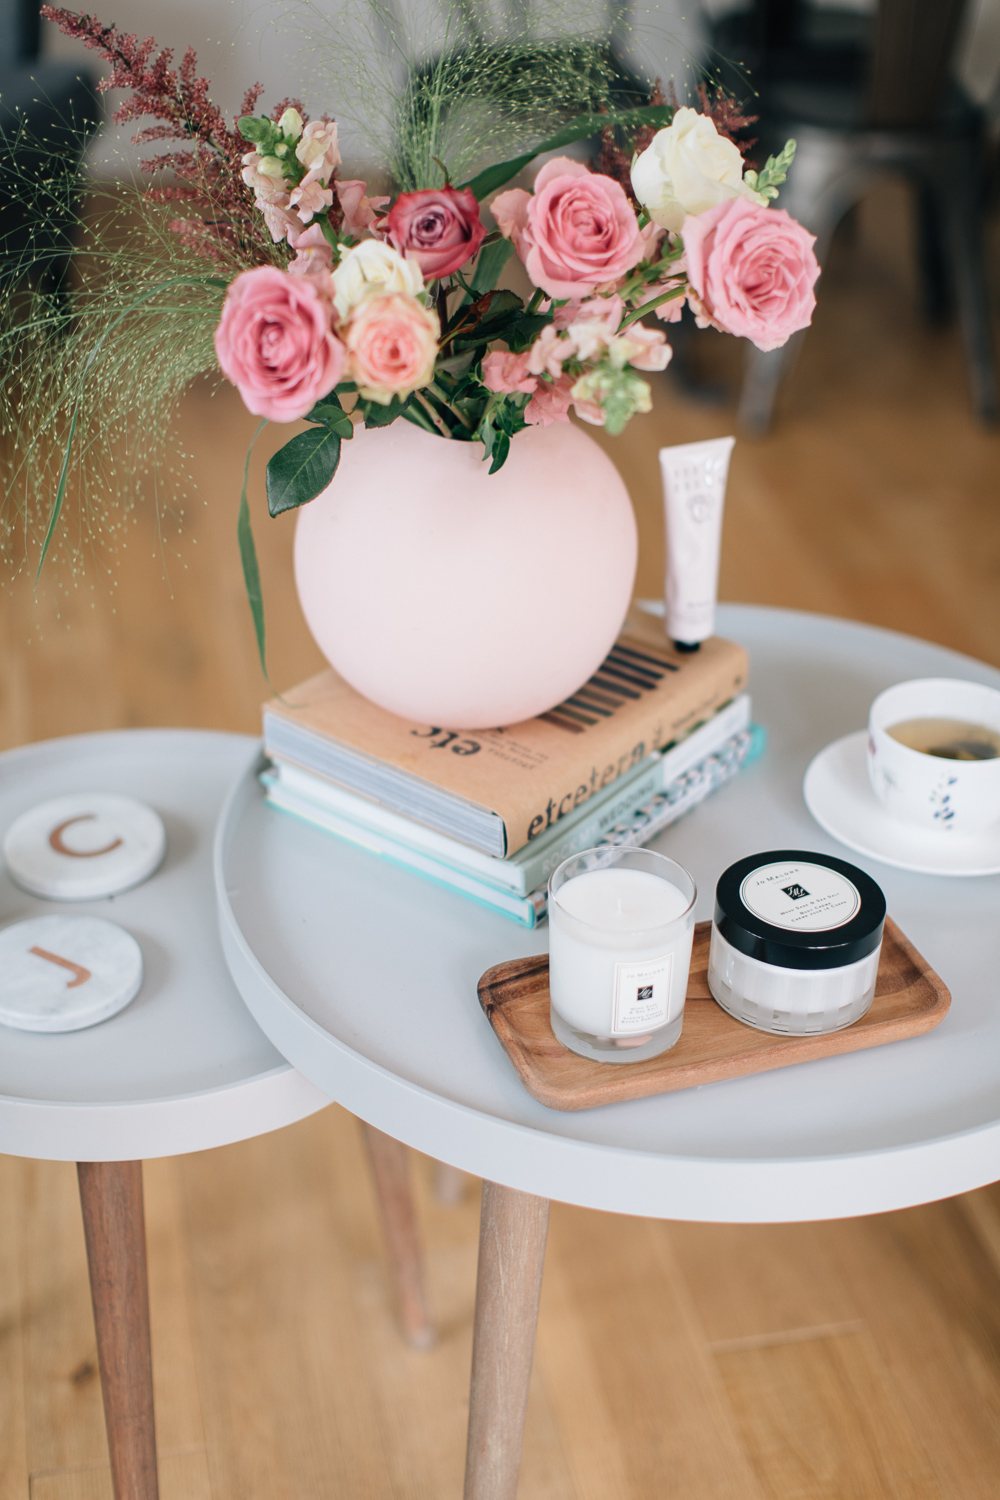 Blush accents and Jo Malone products on Cox & Cox side tables